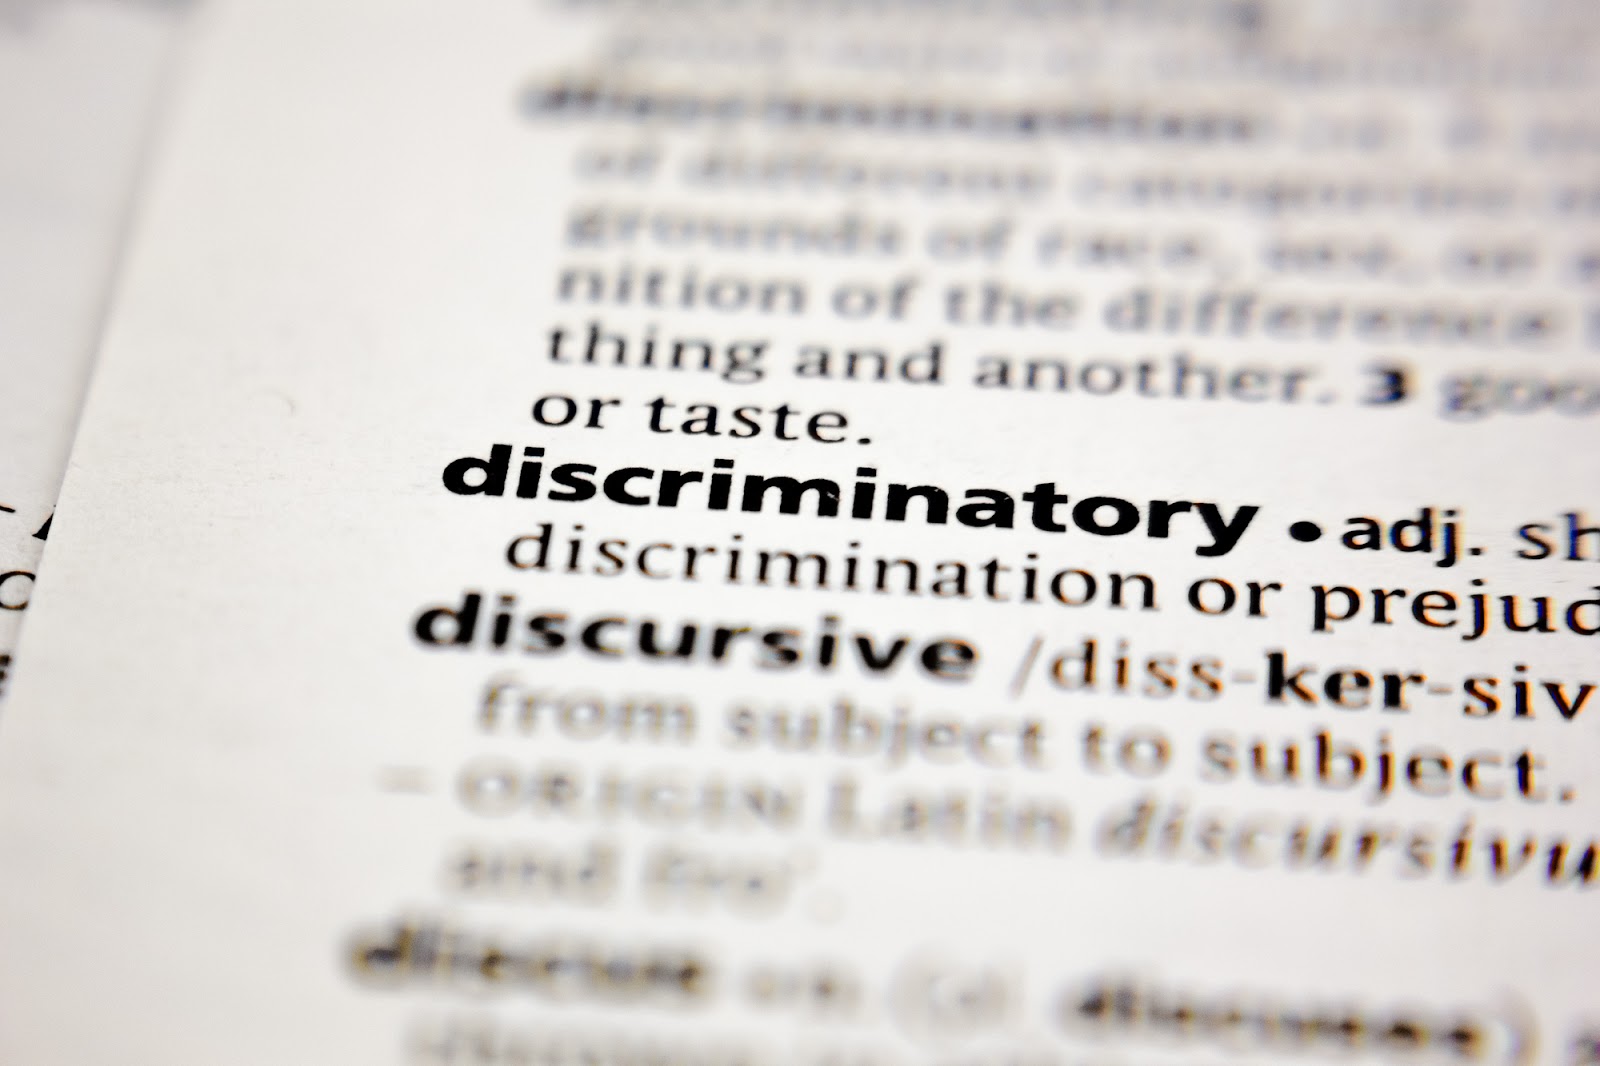 The History of Racial Discrimination in Housing and Discriminatory Practices